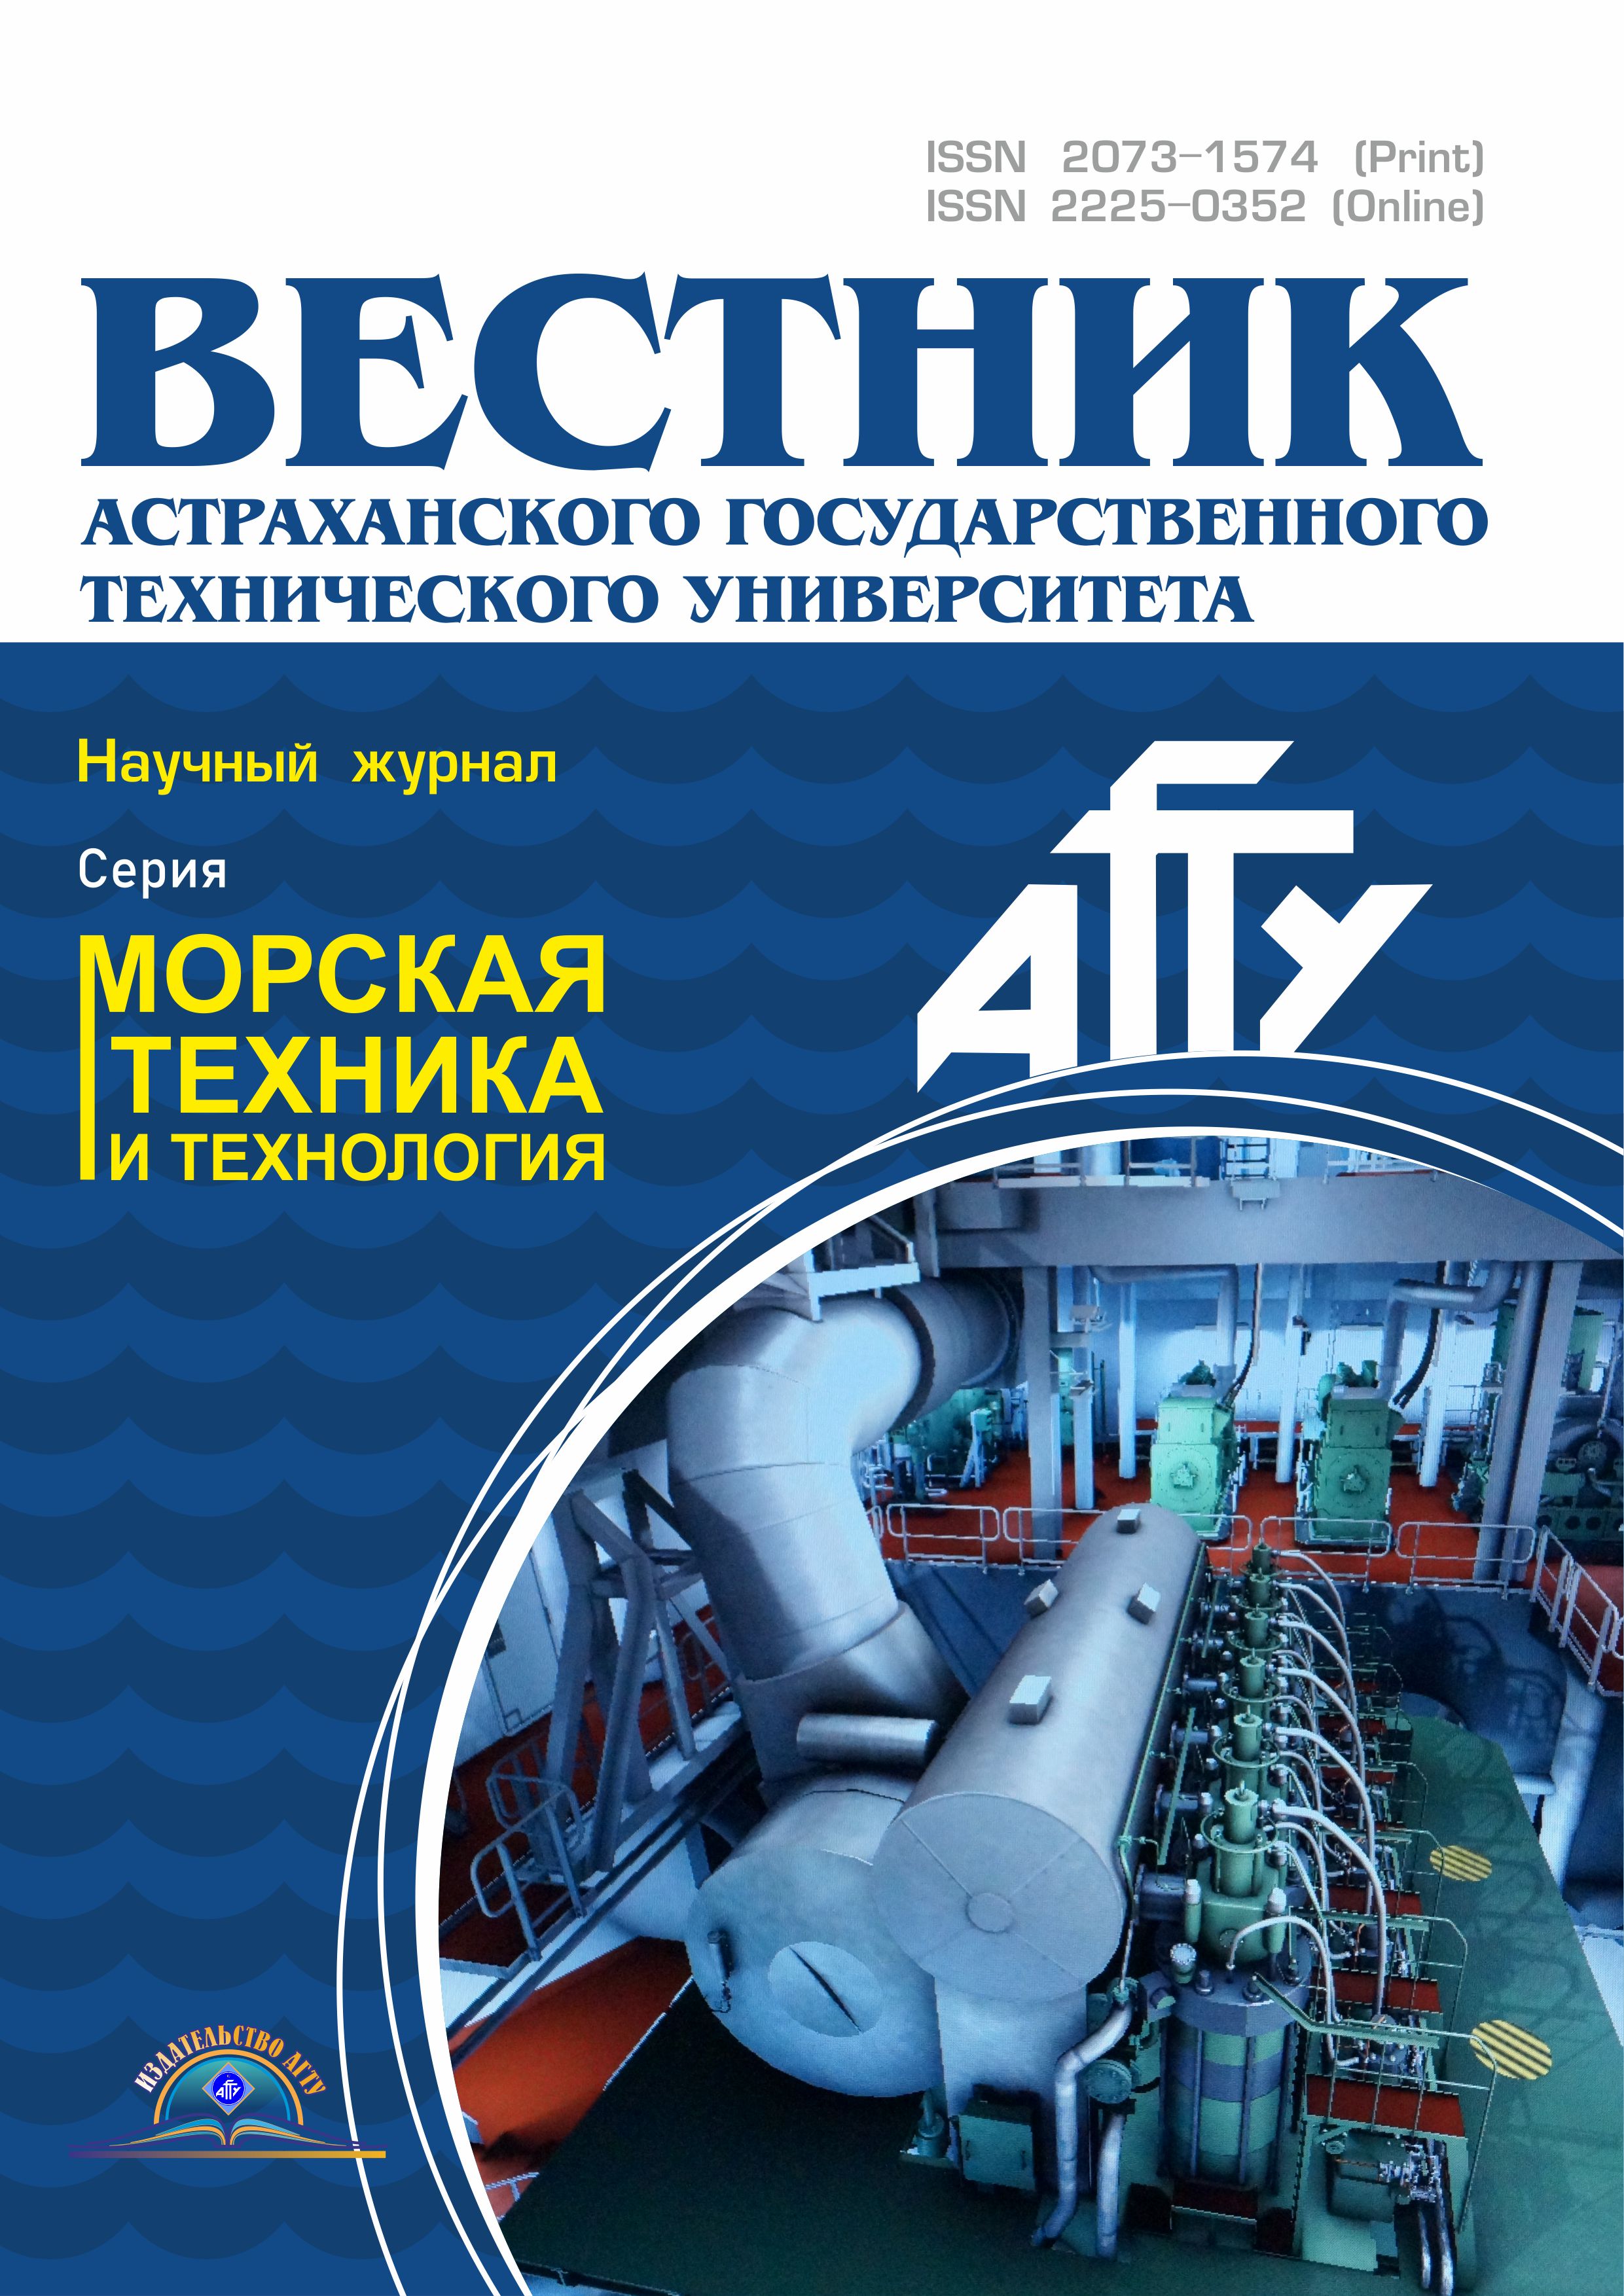                         CHOICE OF THE TECHNOLOGICAL PROCESS OF THE SHIP HULL UTILIZATION USING THE METHOD OF EXPERT ASSESSMENTS
            